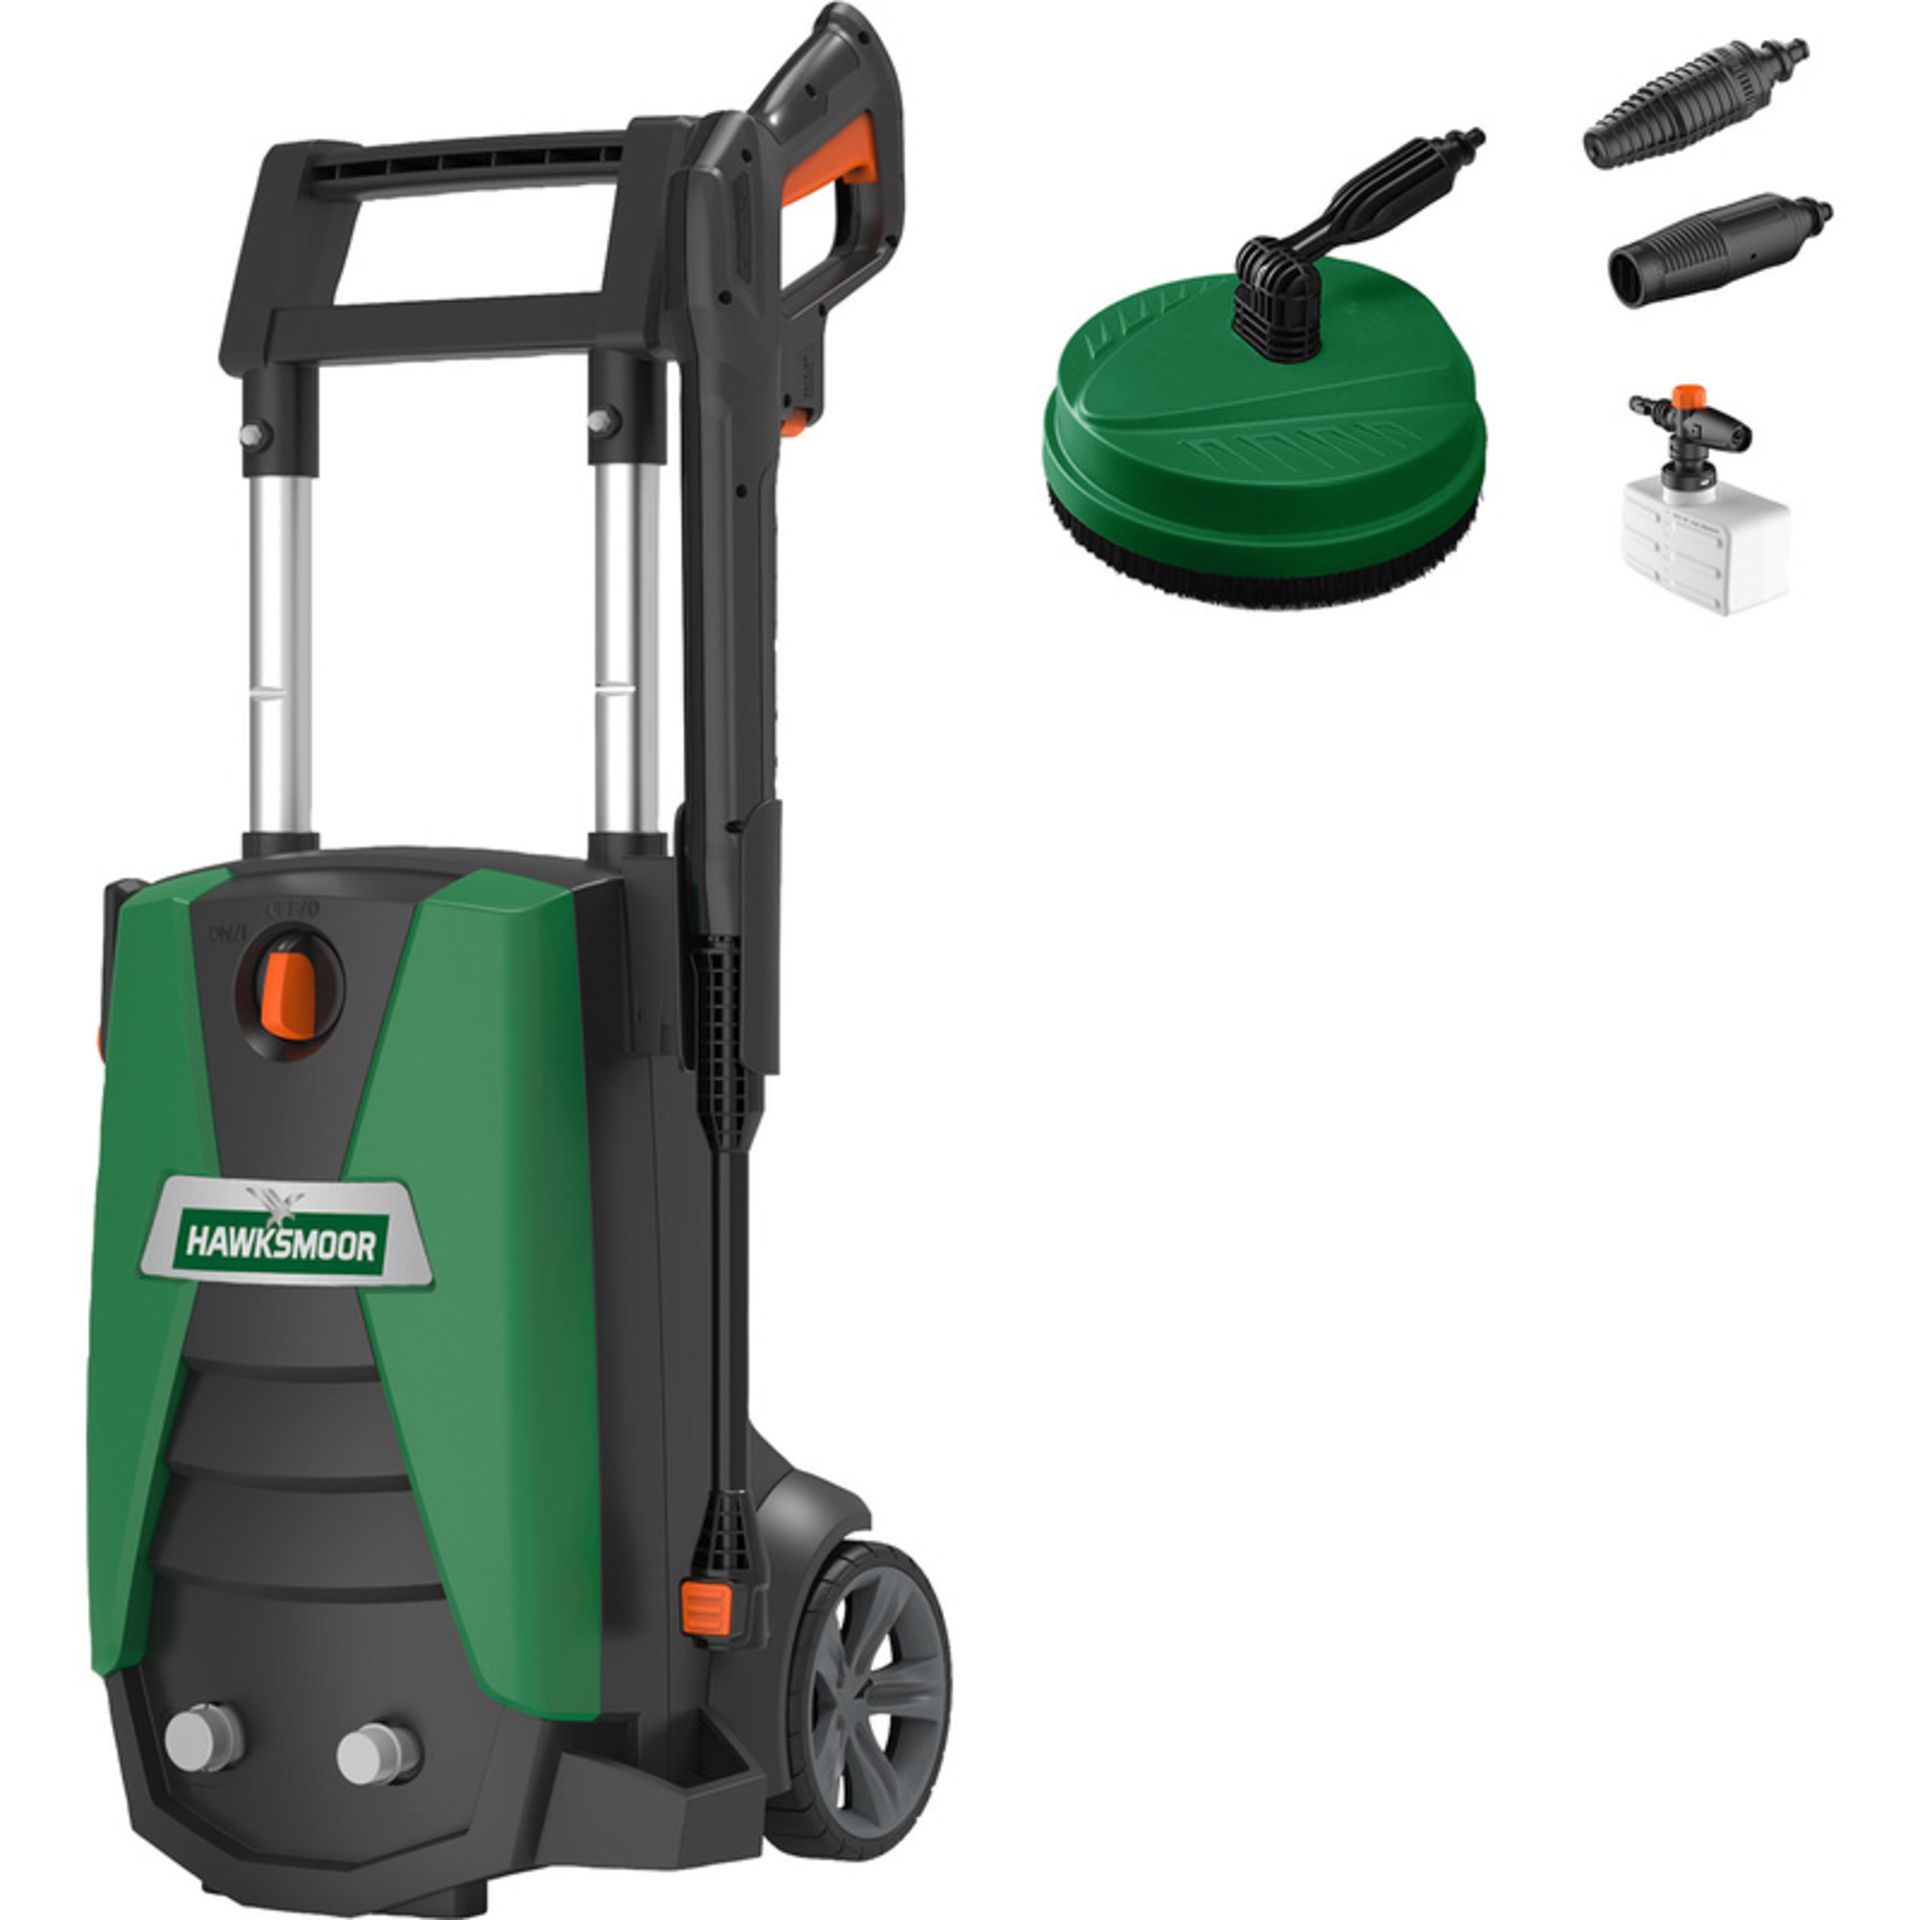 Hawksmoor High Pressure Washer 140bar. - ER32. Compact design with space-saving integrated accessory